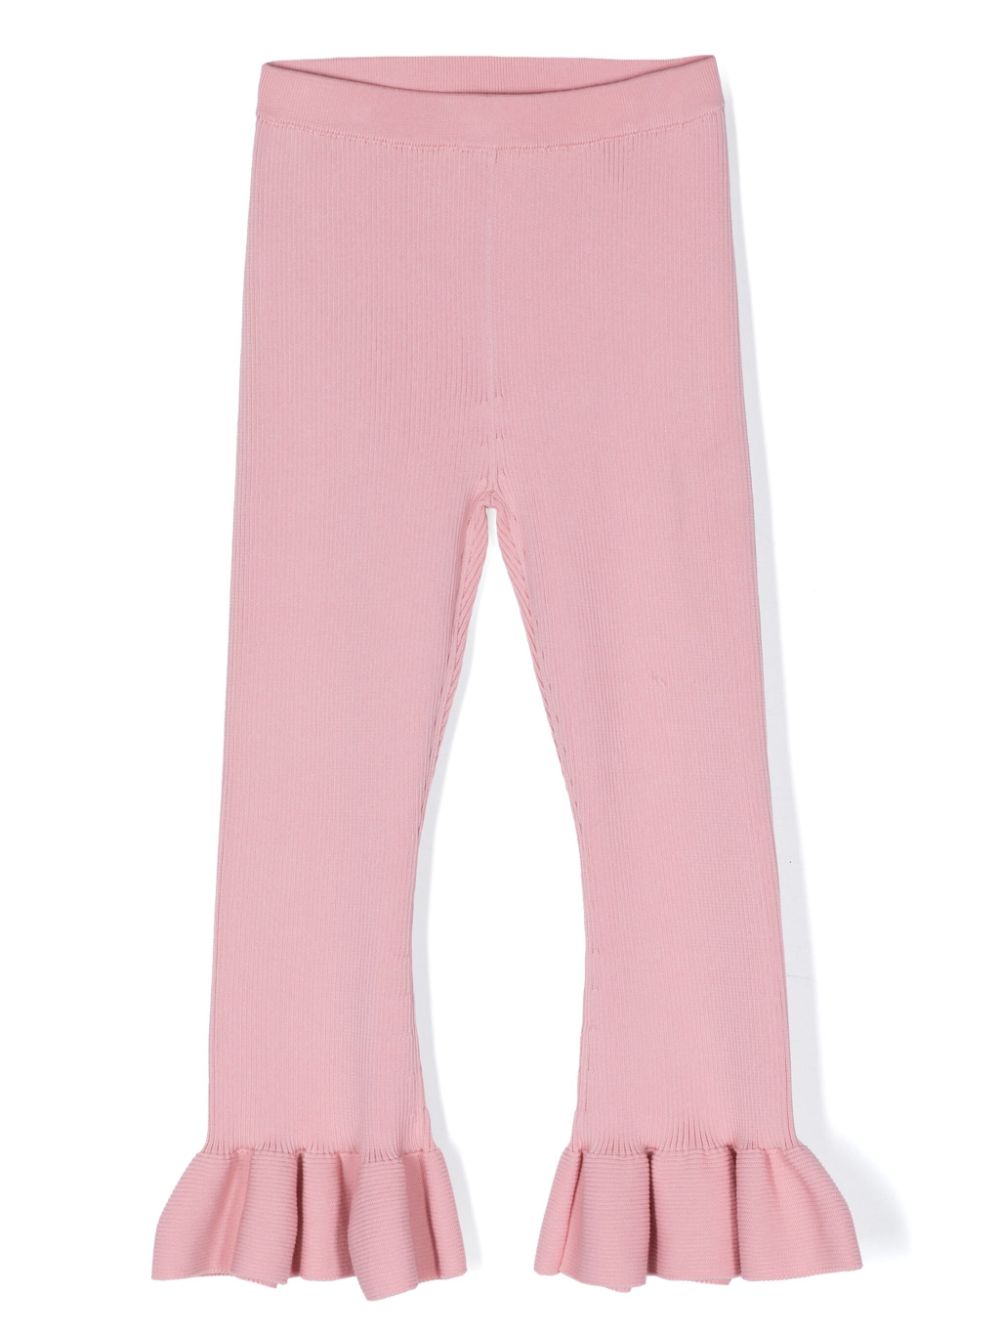 jnby by JNBY ruffled knitted trousers - Pink von jnby by JNBY